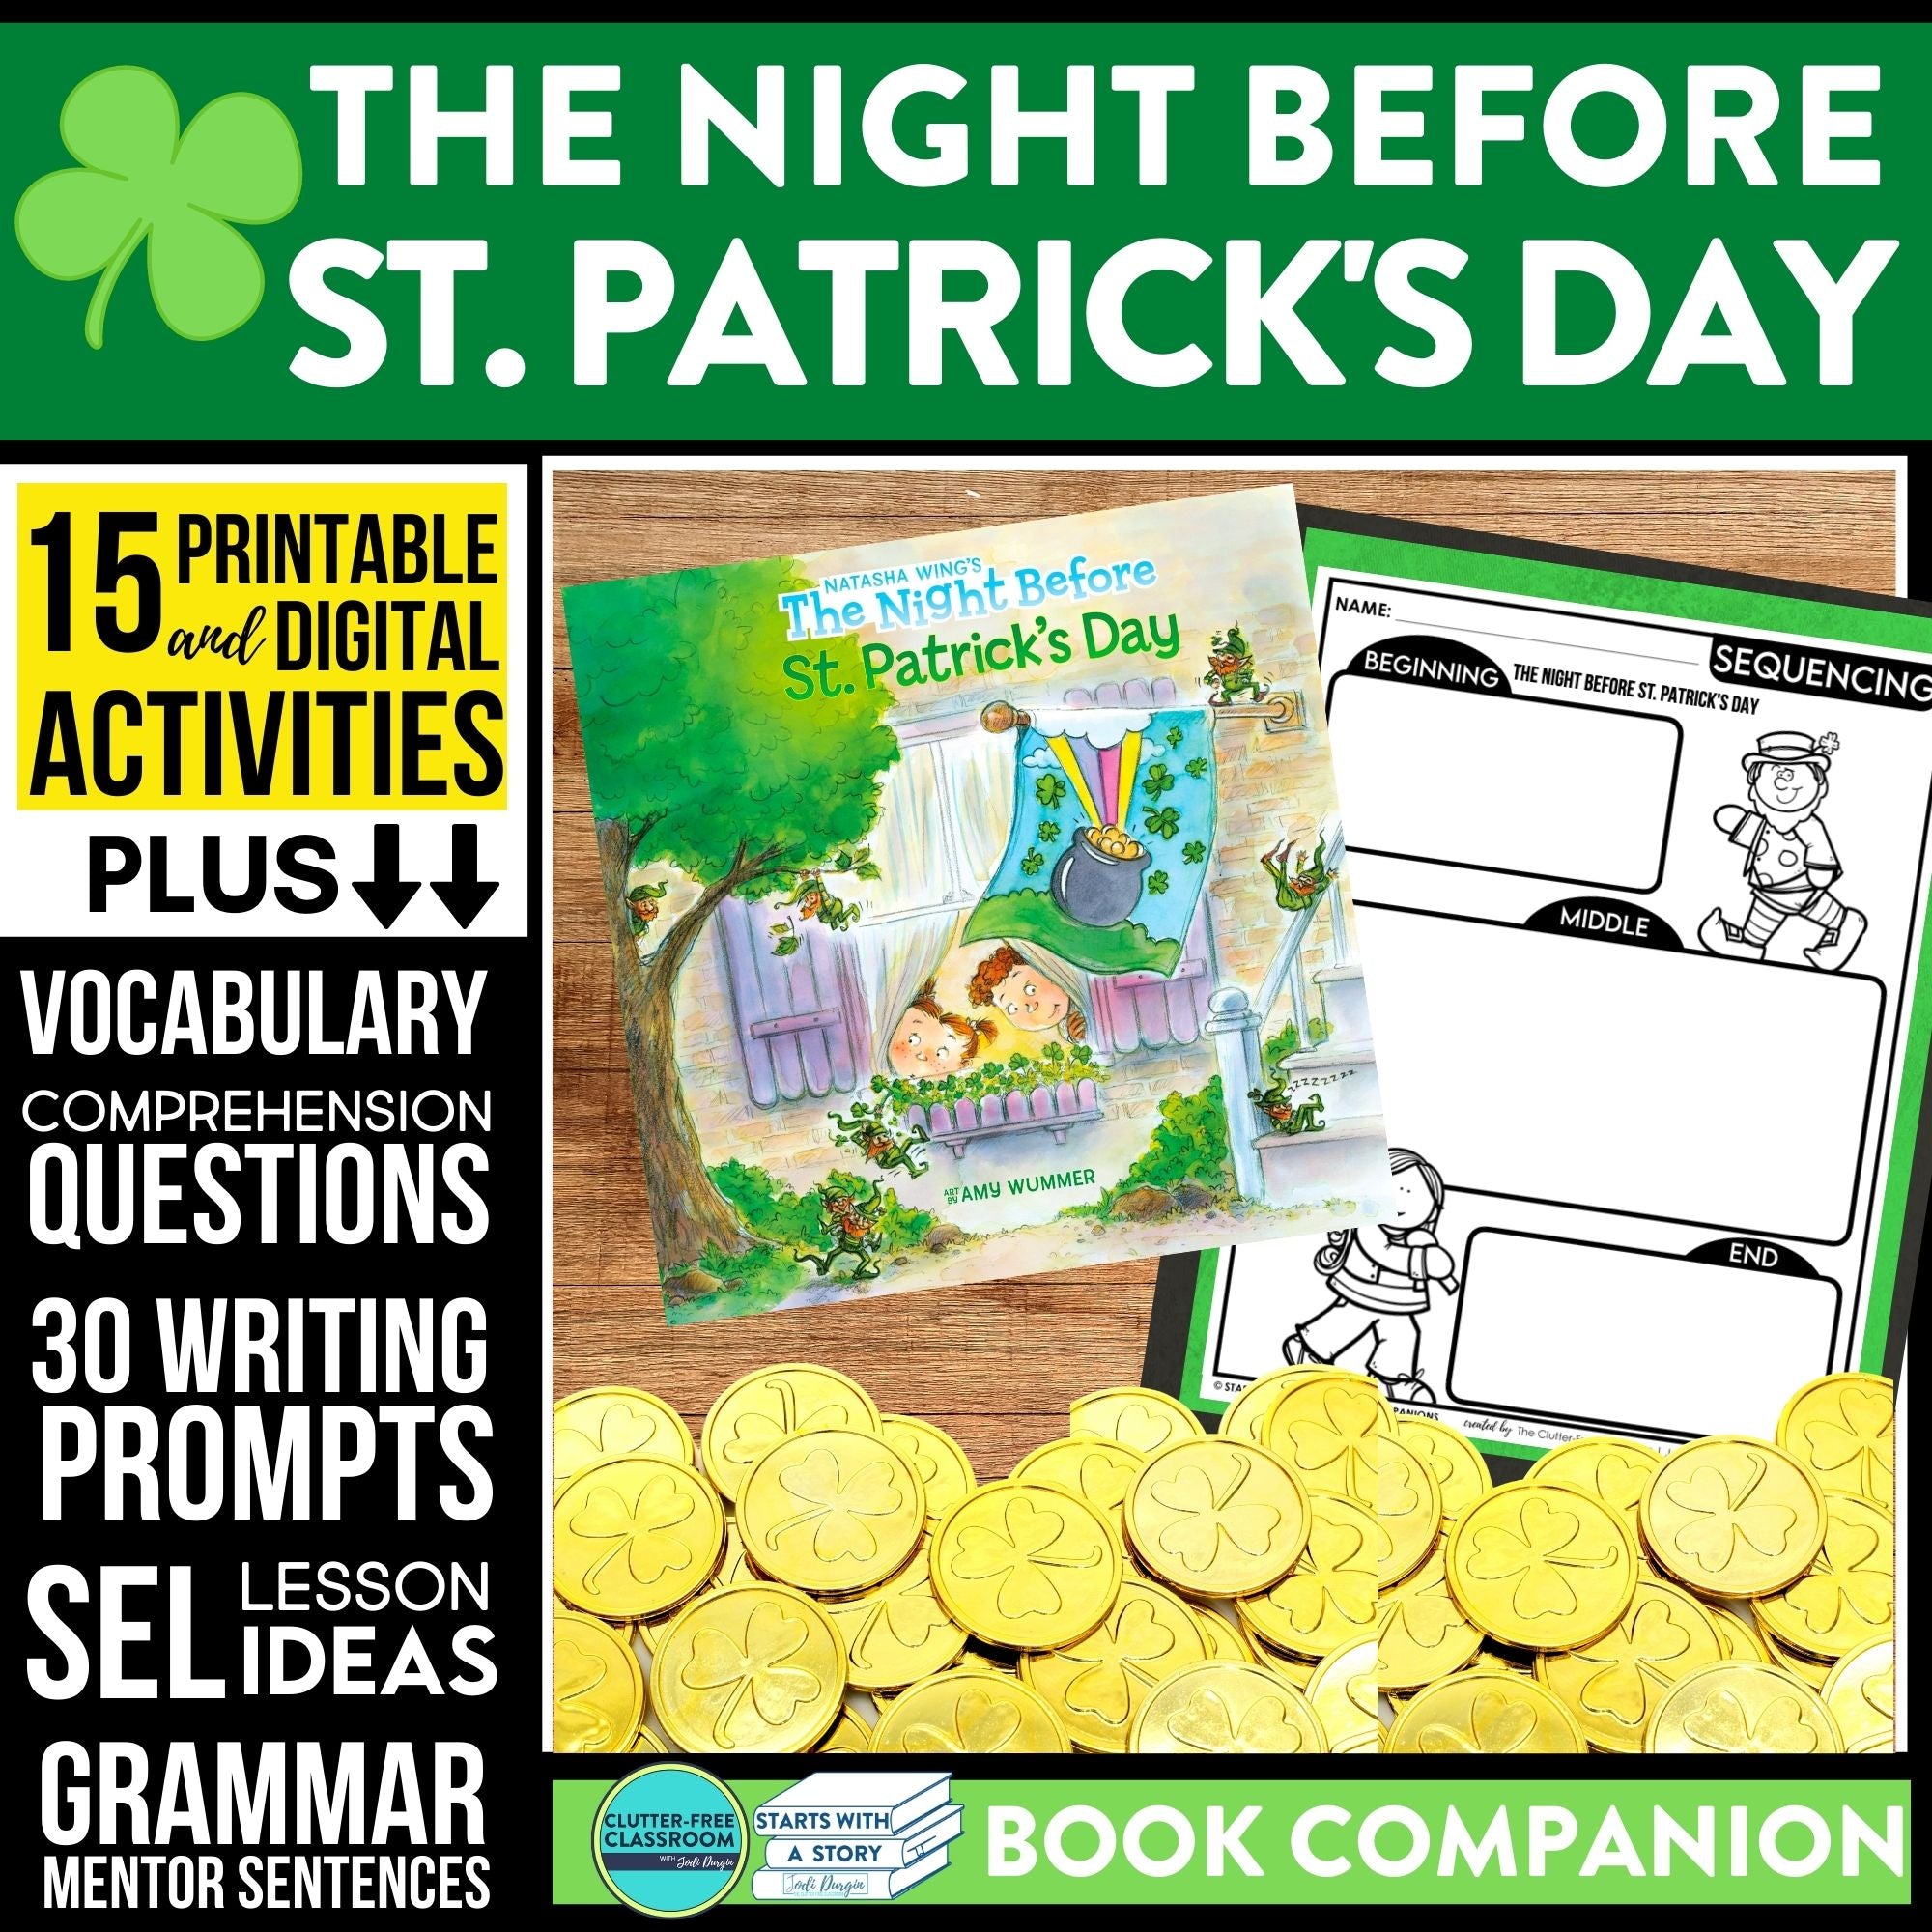 THE NIGHT BEFORE ST. PATRICK'S DAY activities and lesson plan ideas